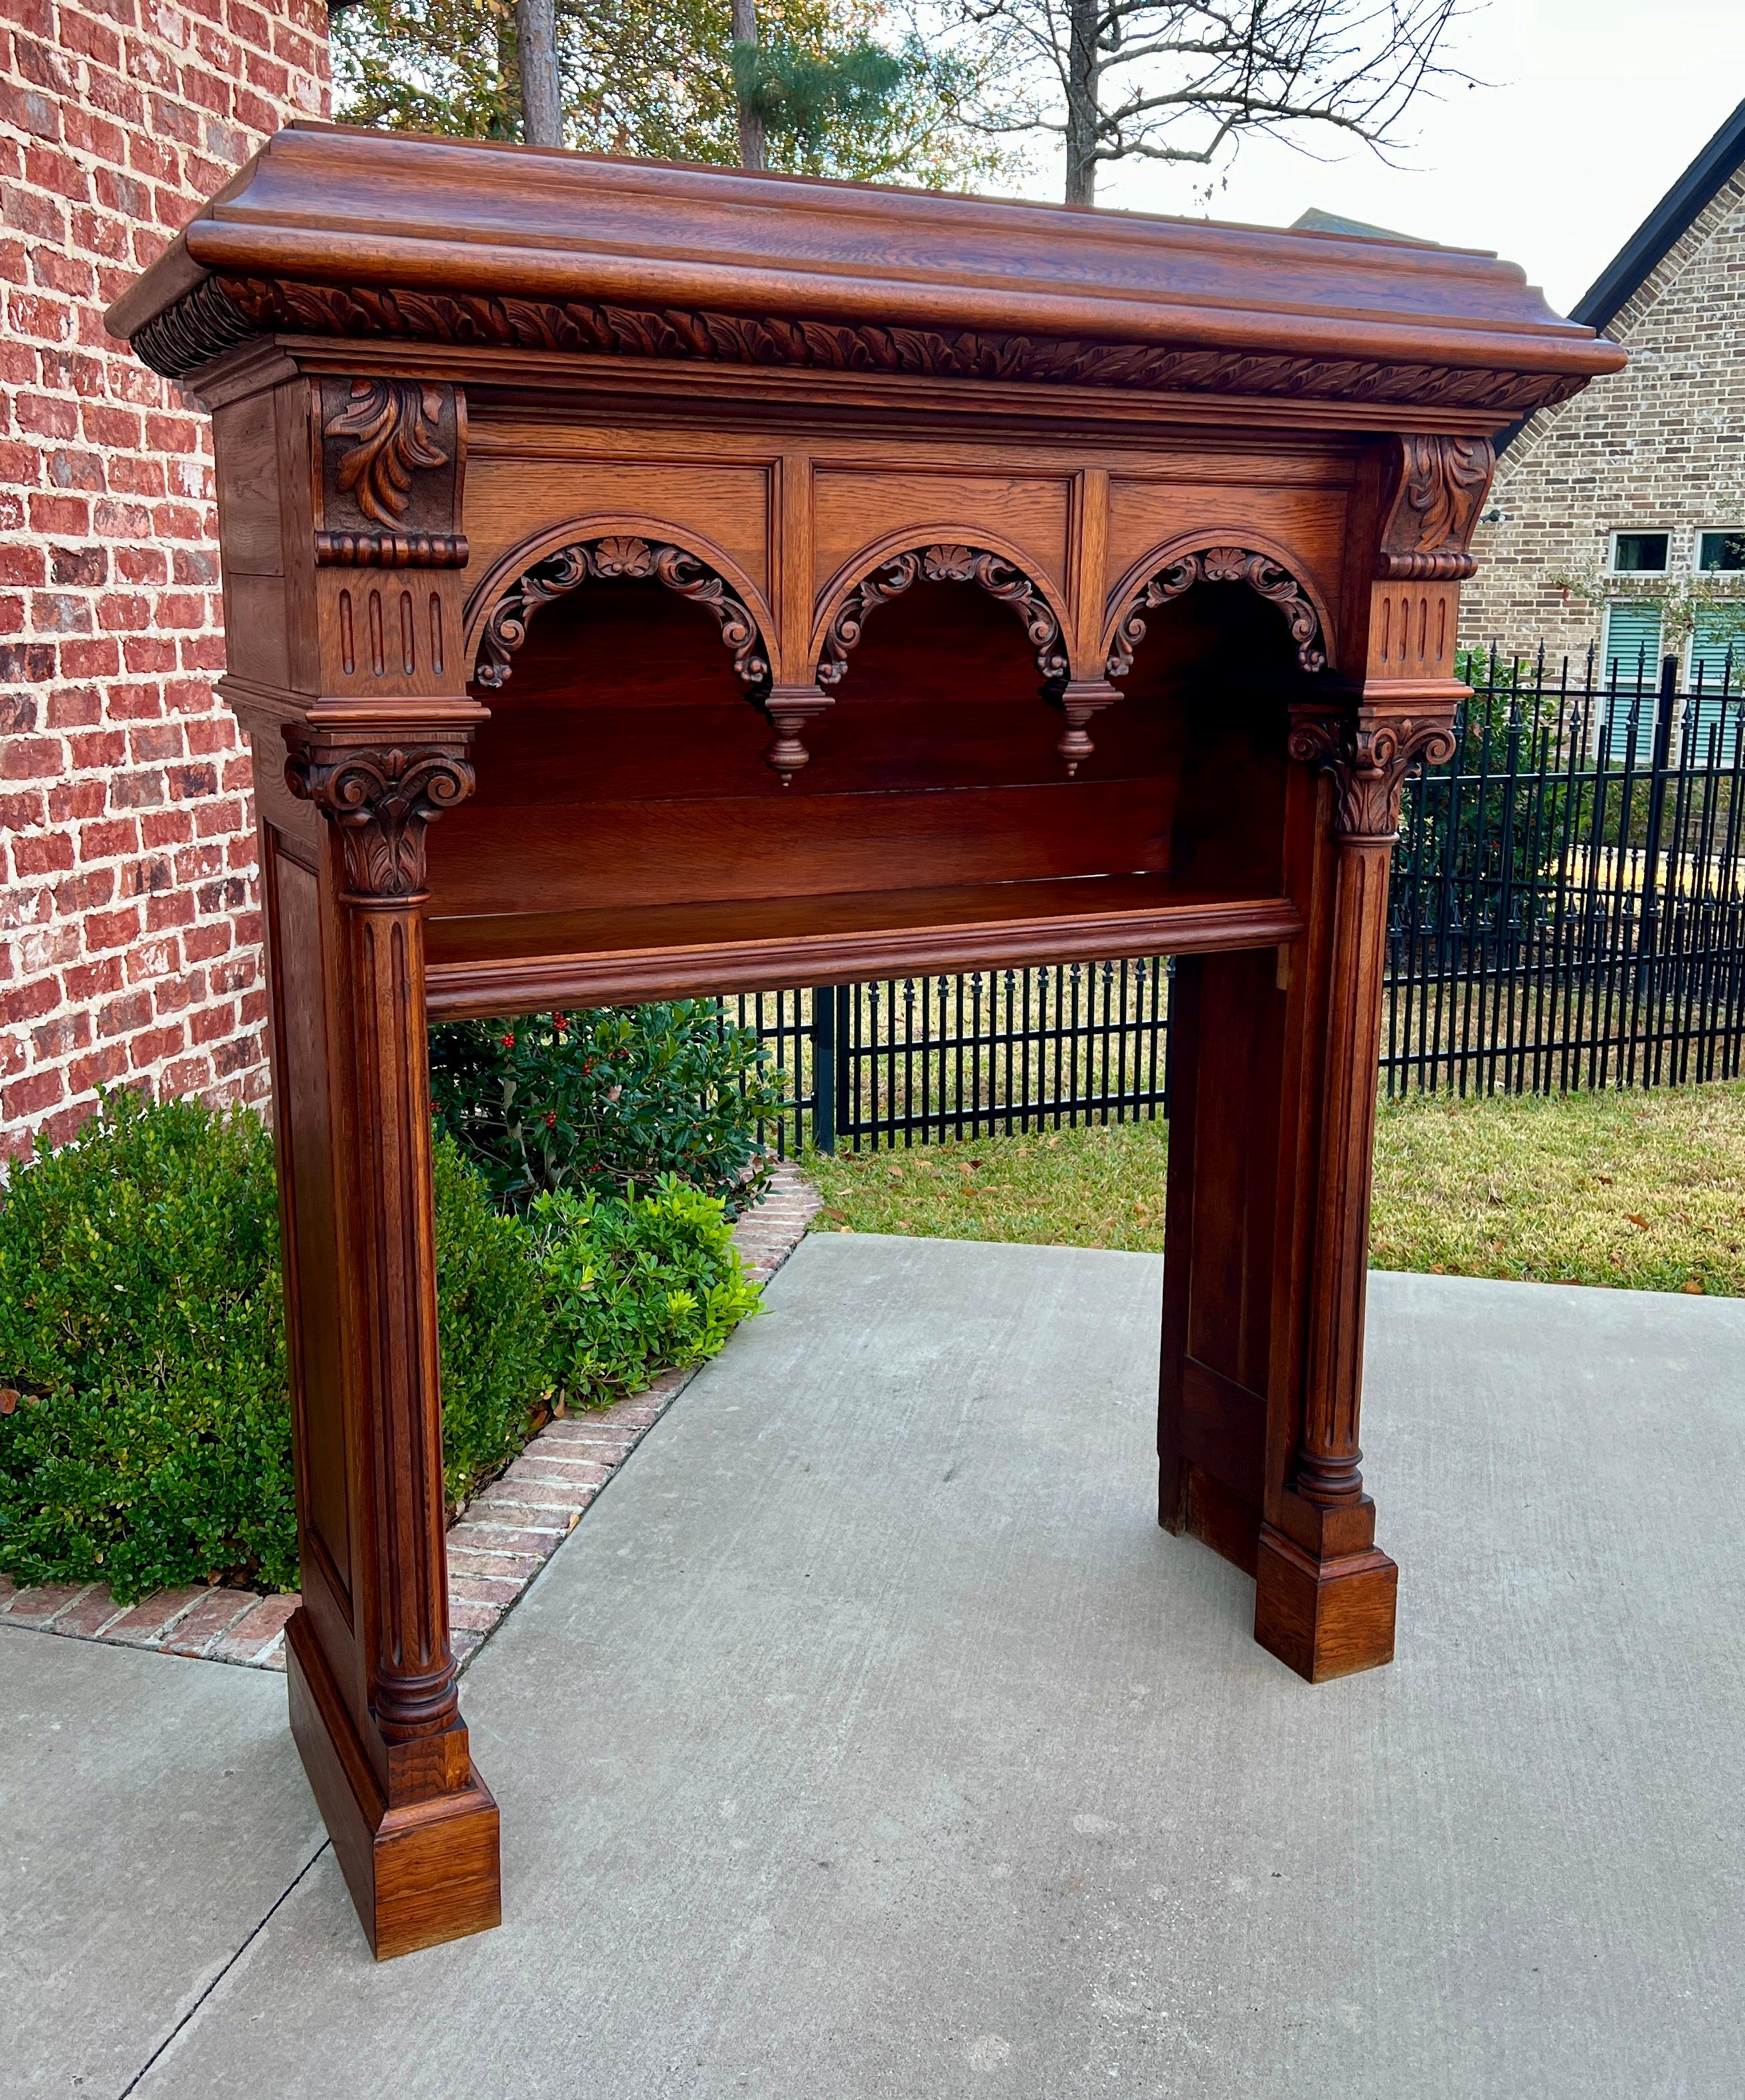 Antique French Fireplace Mantel Surround Renaissance Revival Carved Oak In Good Condition For Sale In Tyler, TX